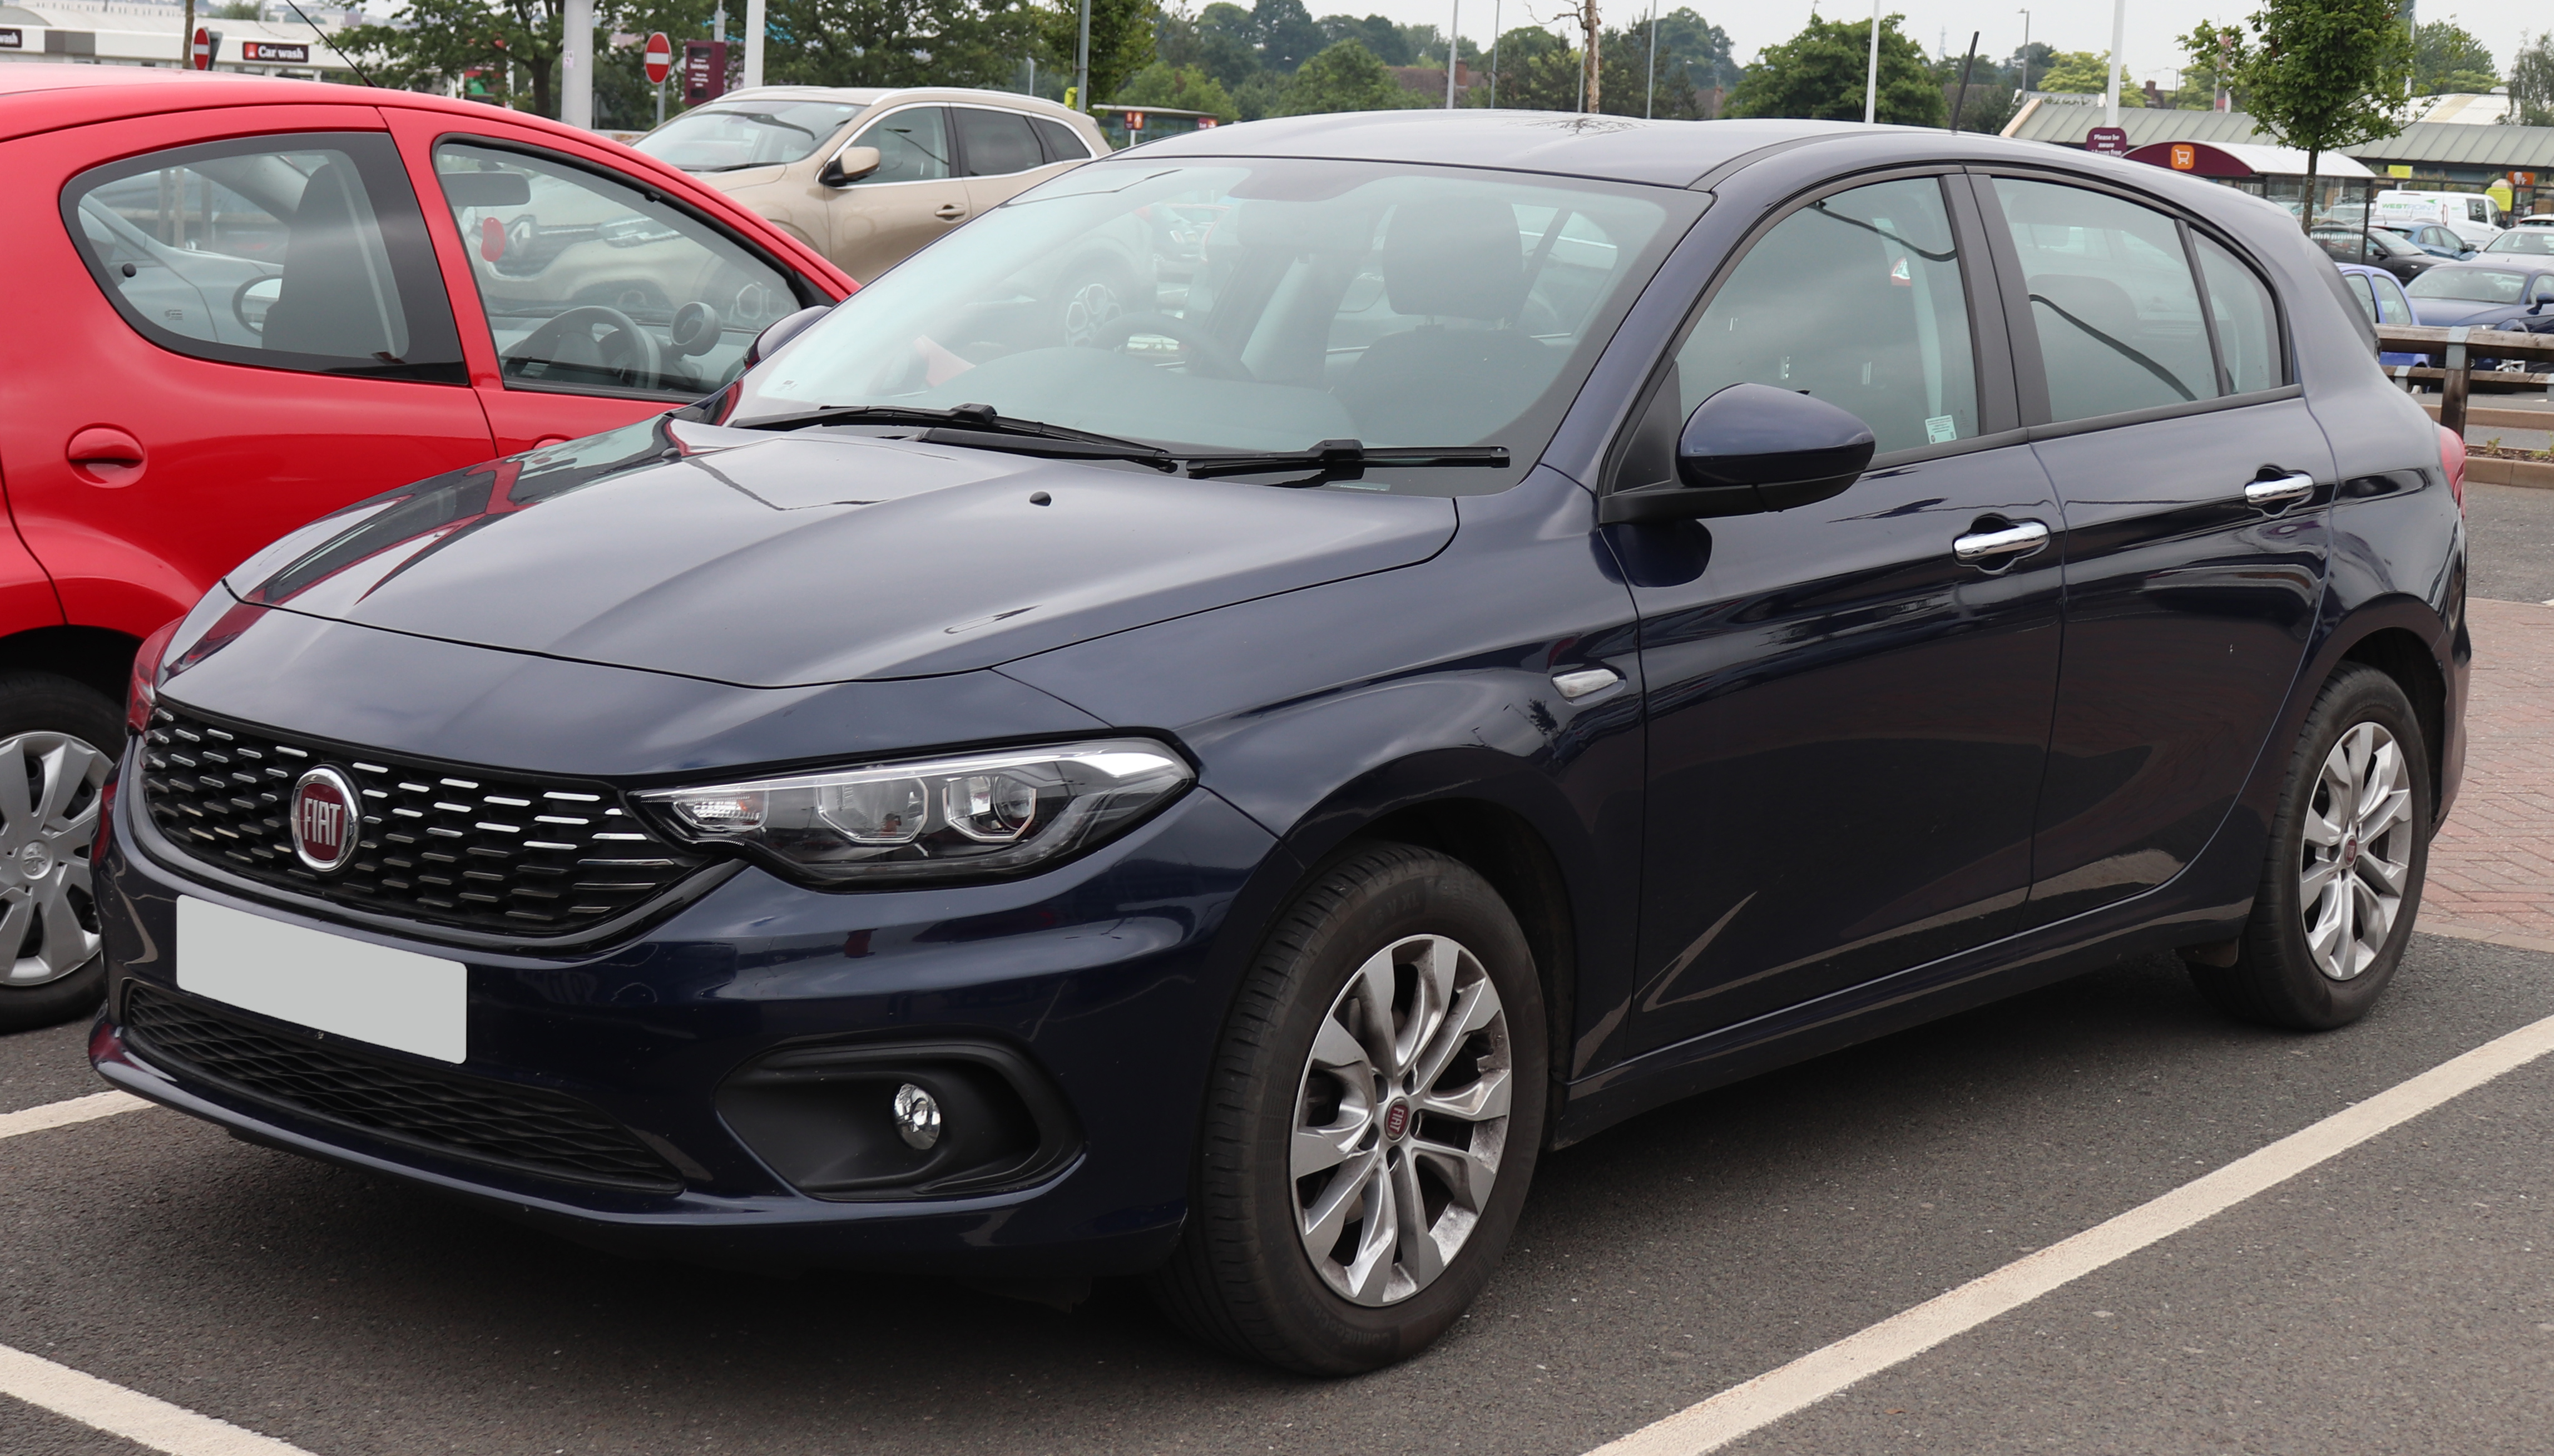 Fiat Tipo mod specifications